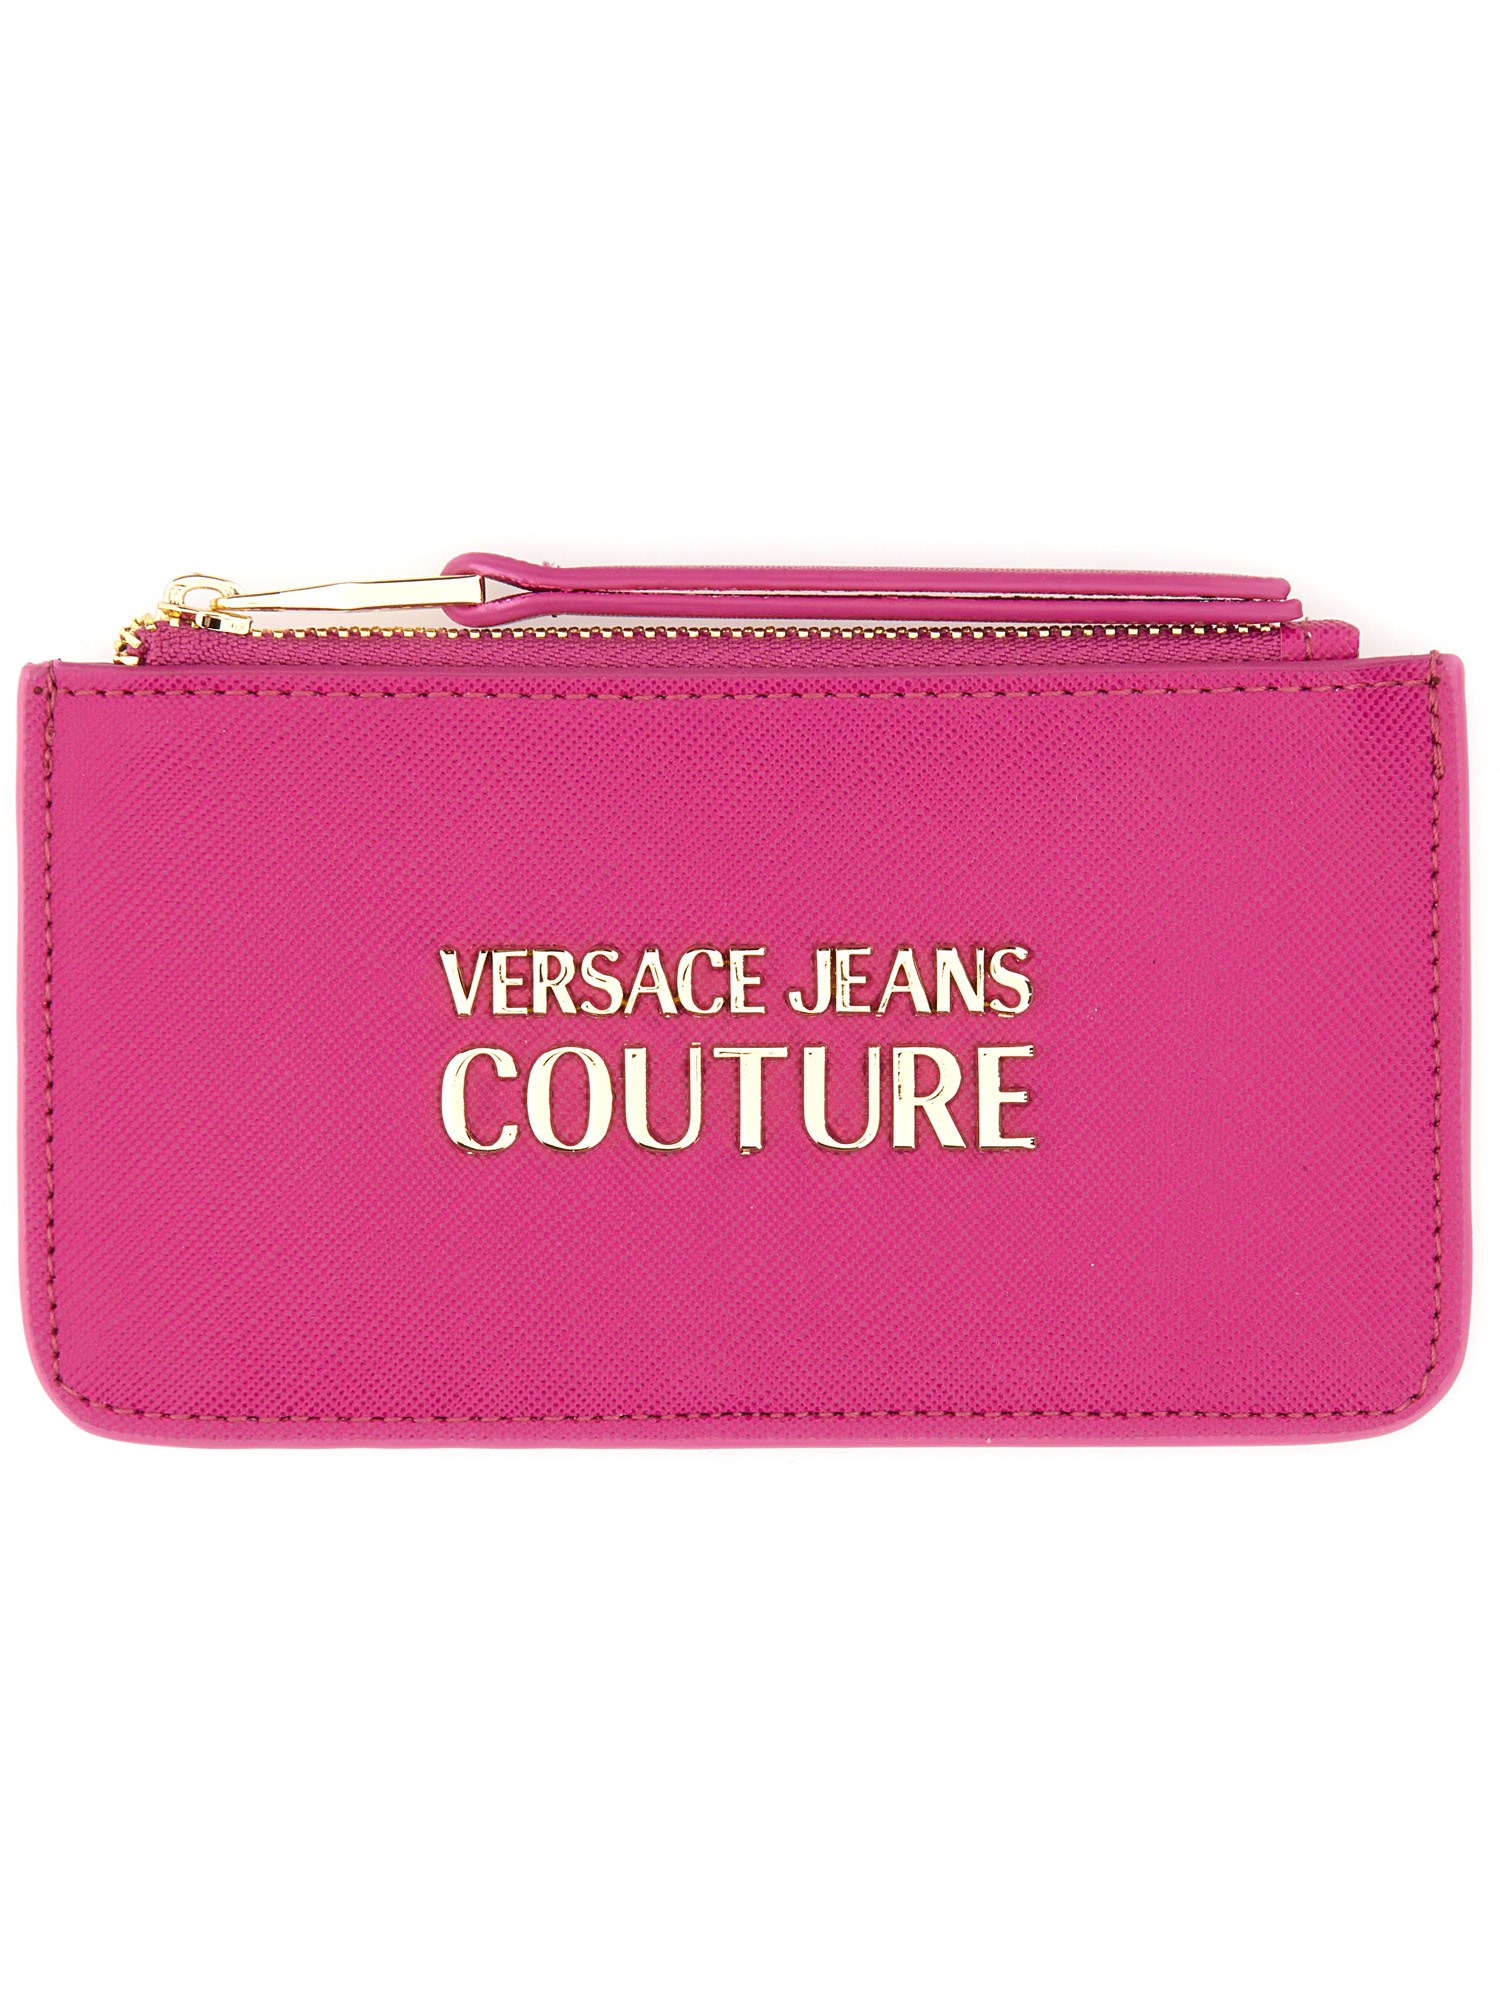 versace jeans couture card holder with logo